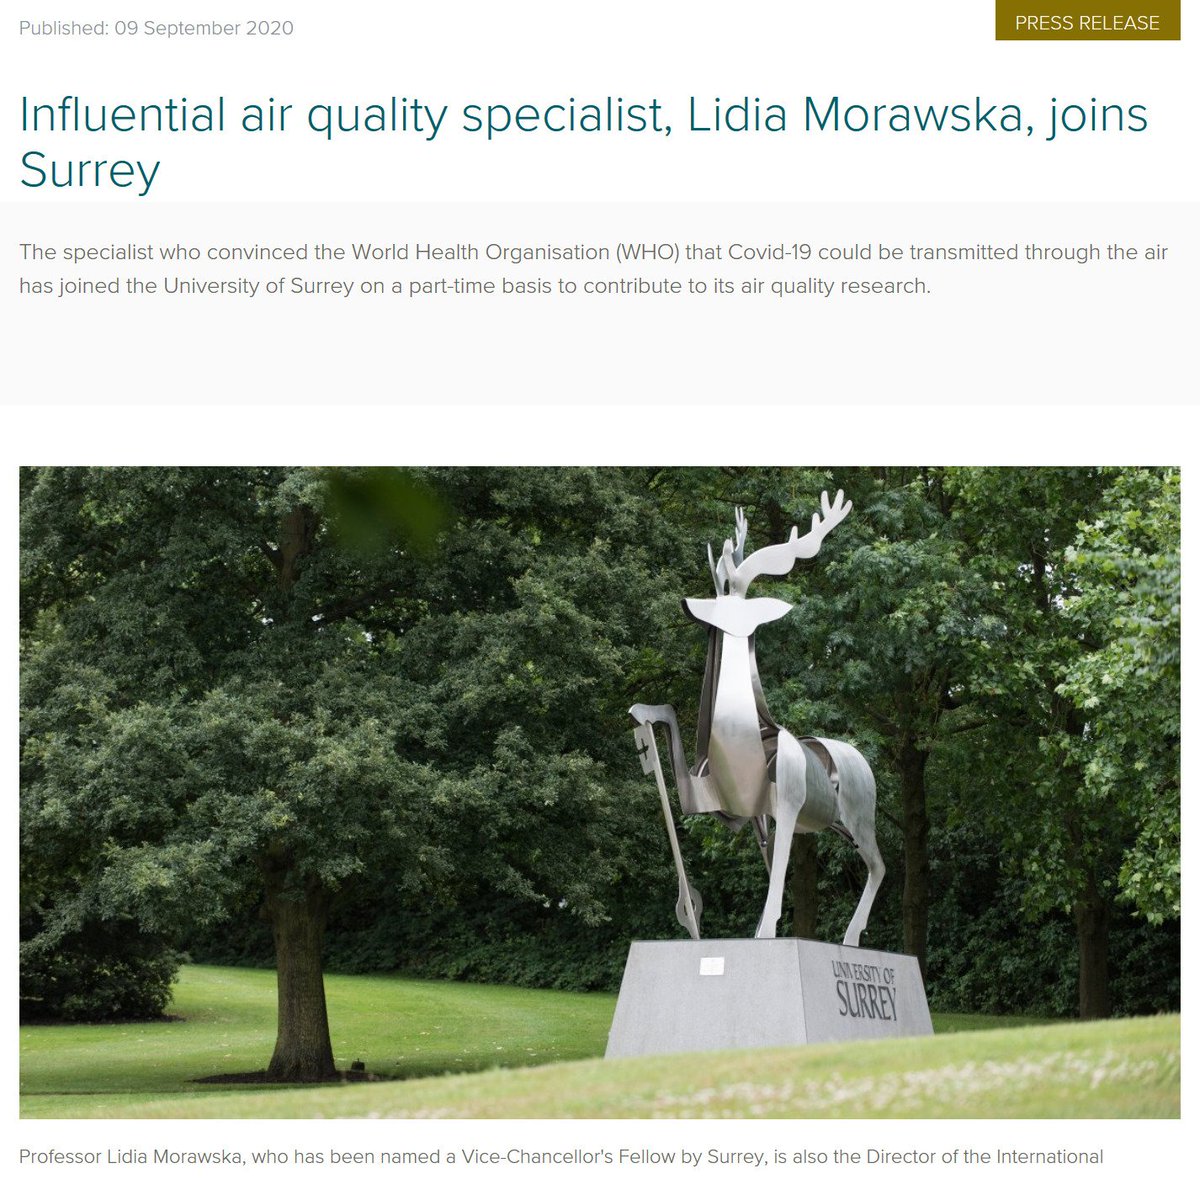 We are delighted to welcome #ProfessorLidiaMorawska for  part-time joining @UniOfSurrey #GCARE team as a #ViceChancellorFellow. Lidia is a #longterm #collaborator & played a leading role in getting the #airbornetransmission of #COVID19 recognised by #WHO: surrey.ac.uk/news/influenti…